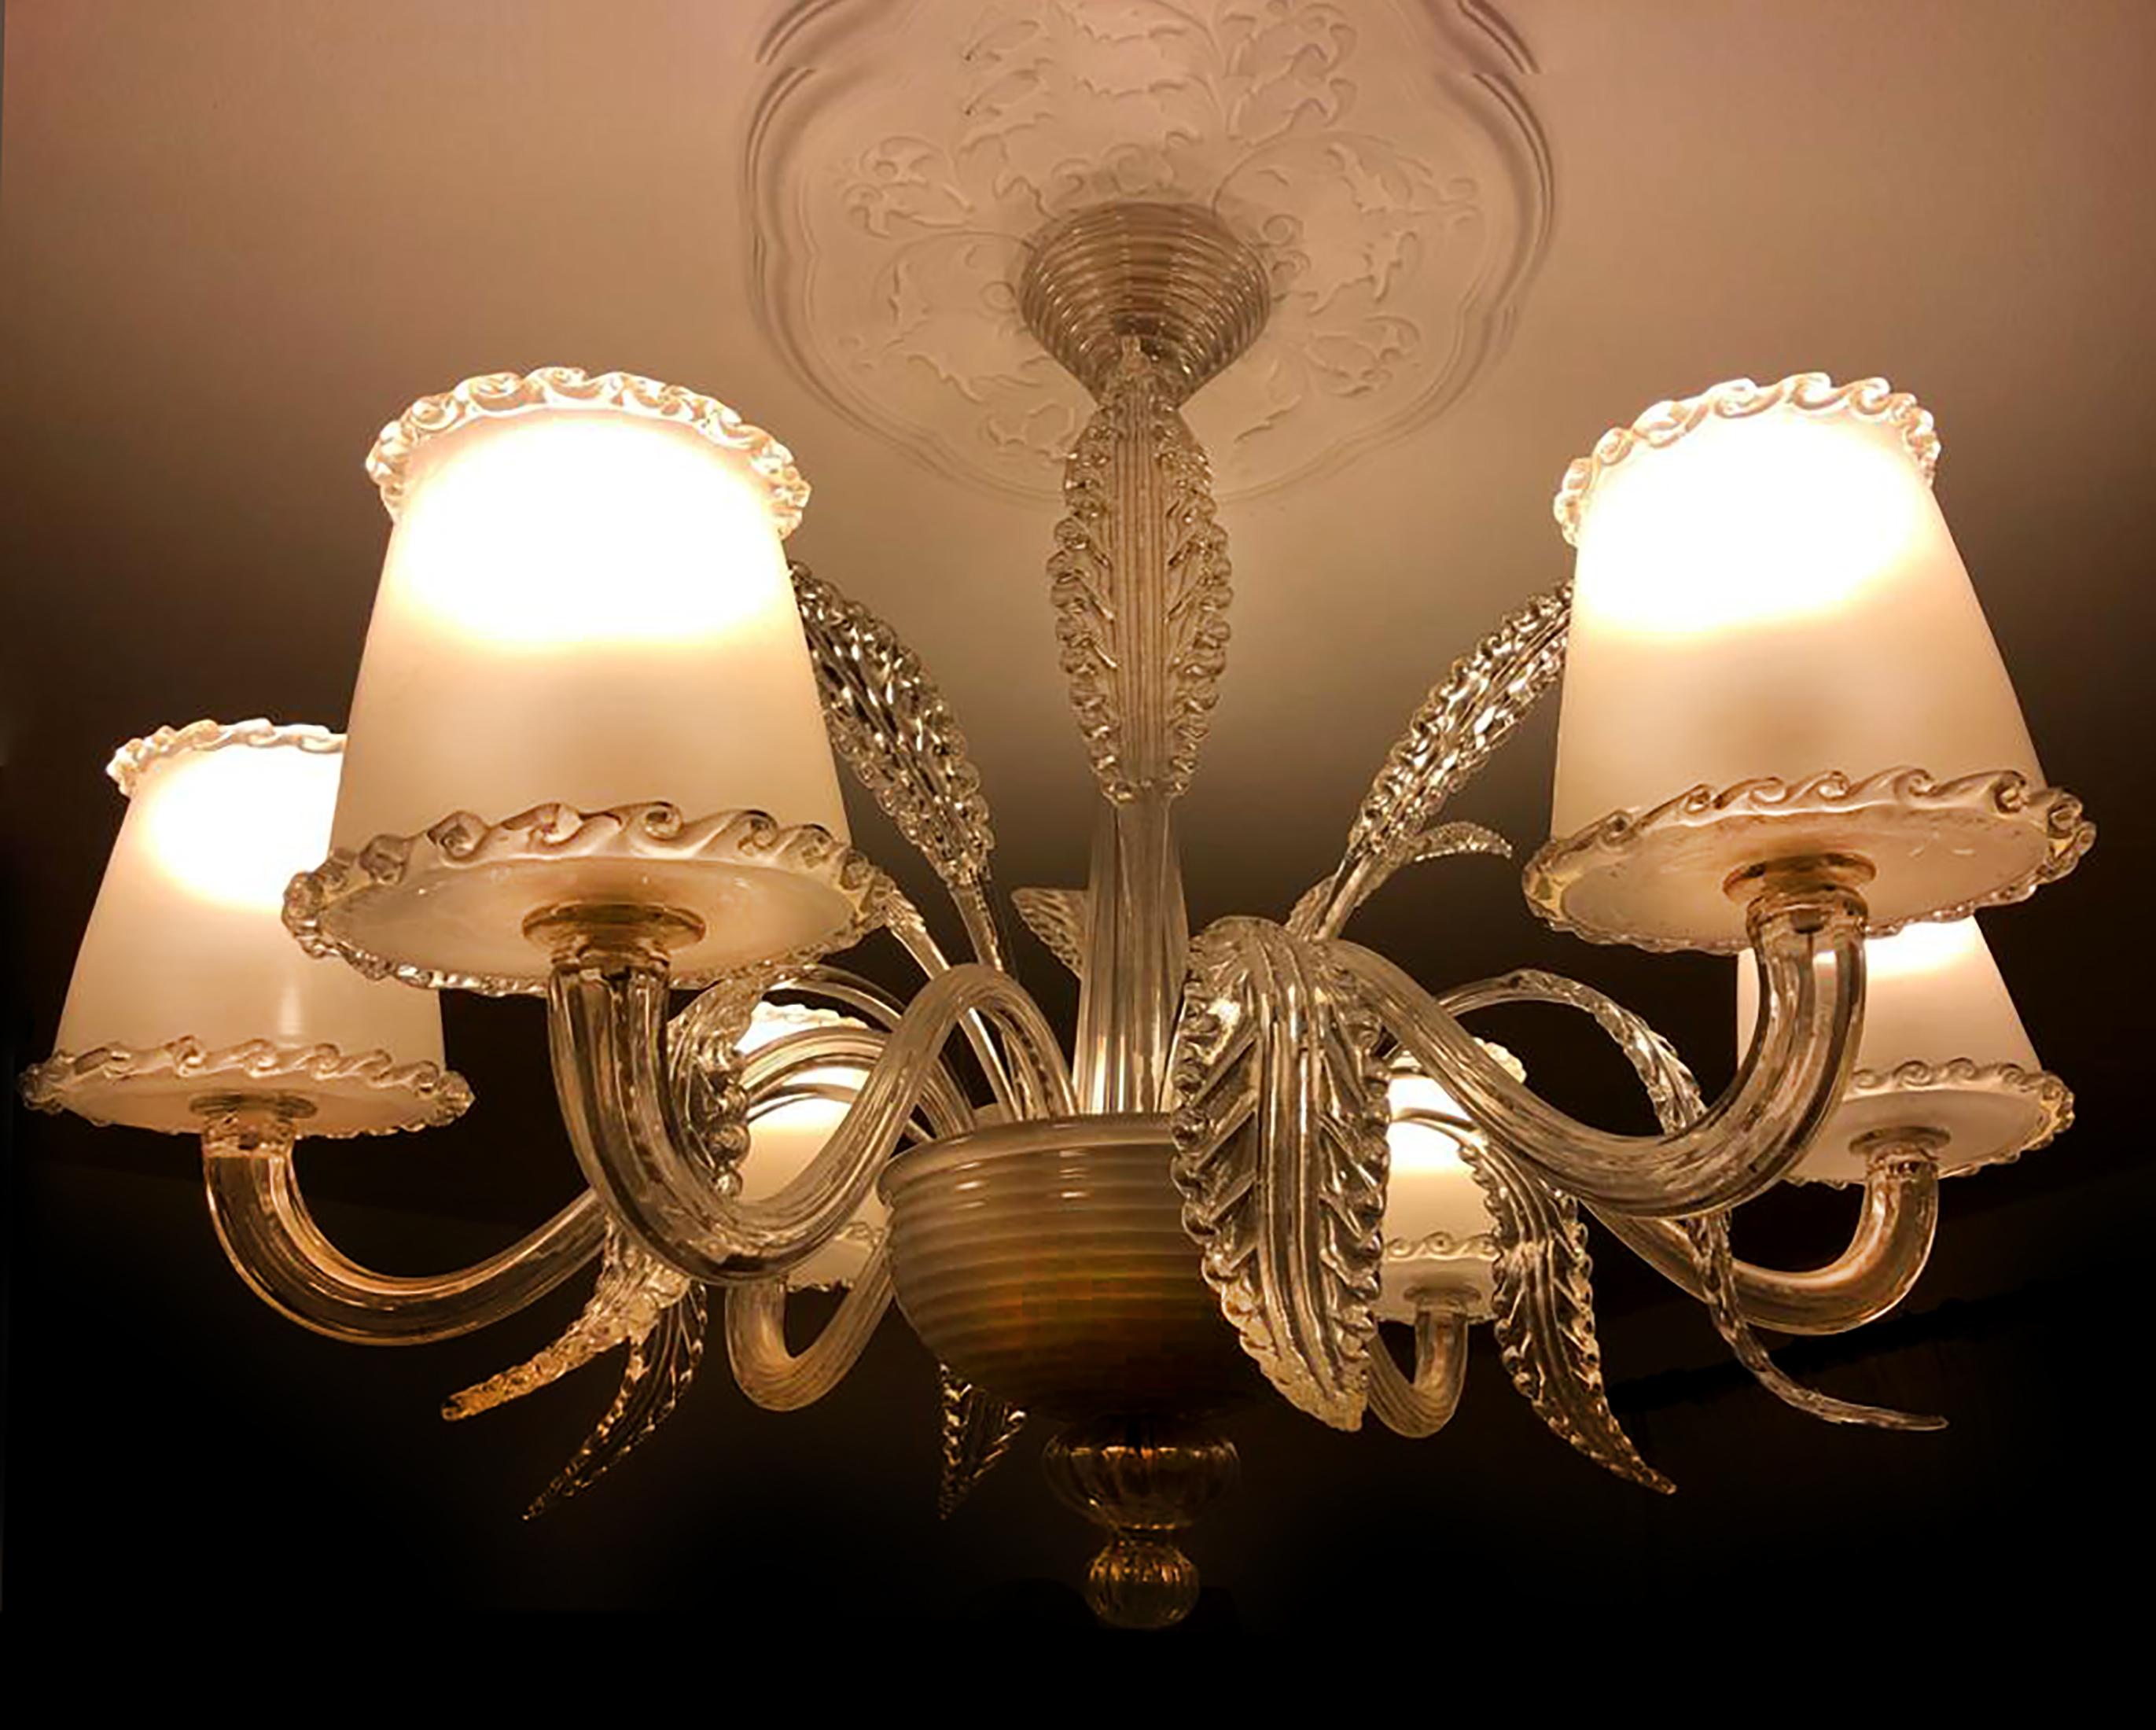 Mid-20th Century Italian Chandelier by Barovier & Toso, Murano, 1940s For Sale 1